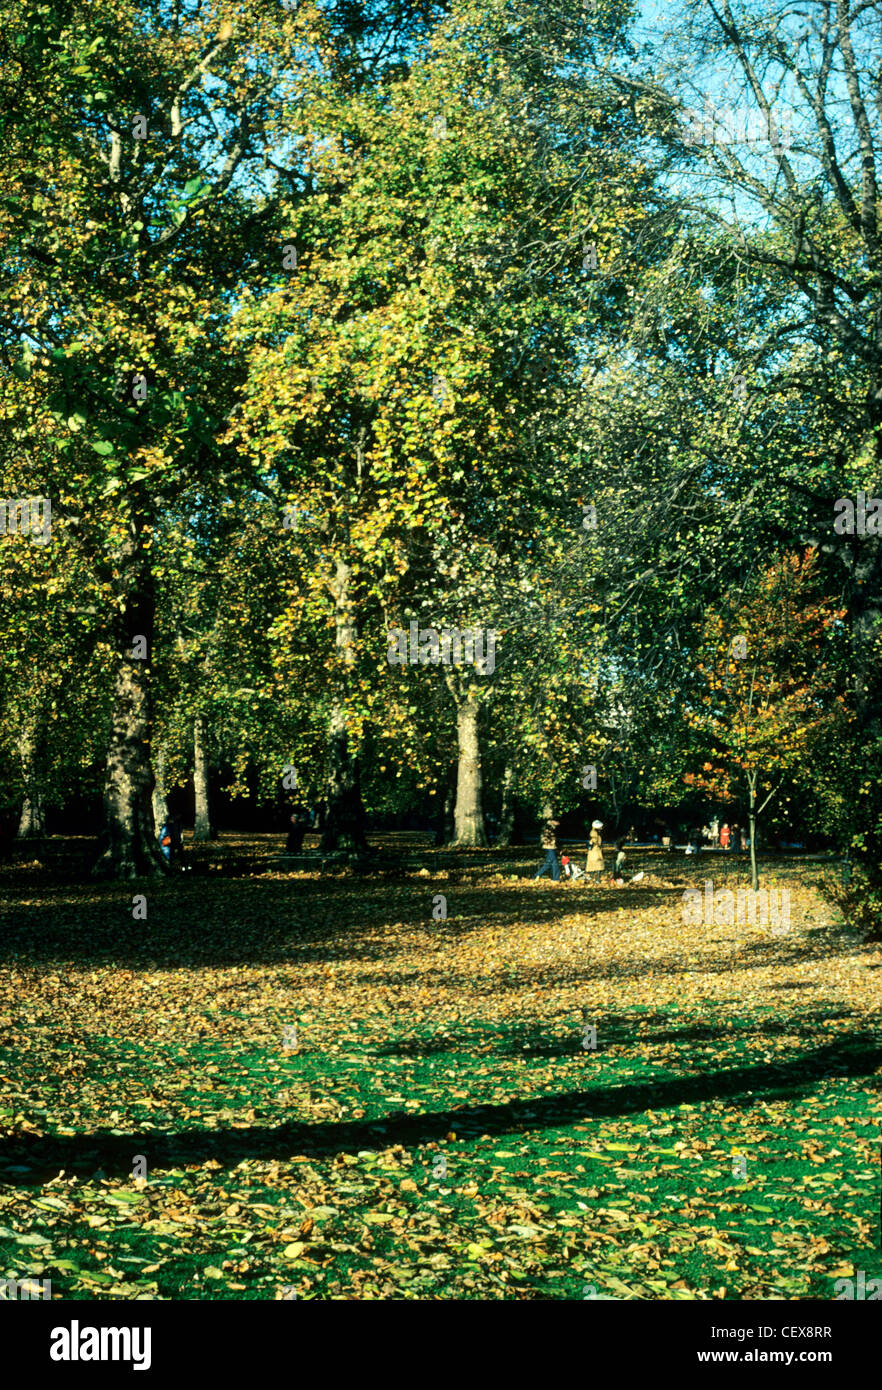 St. James Park, autumn time, London England UK parks autumnal in fall Stock Photo